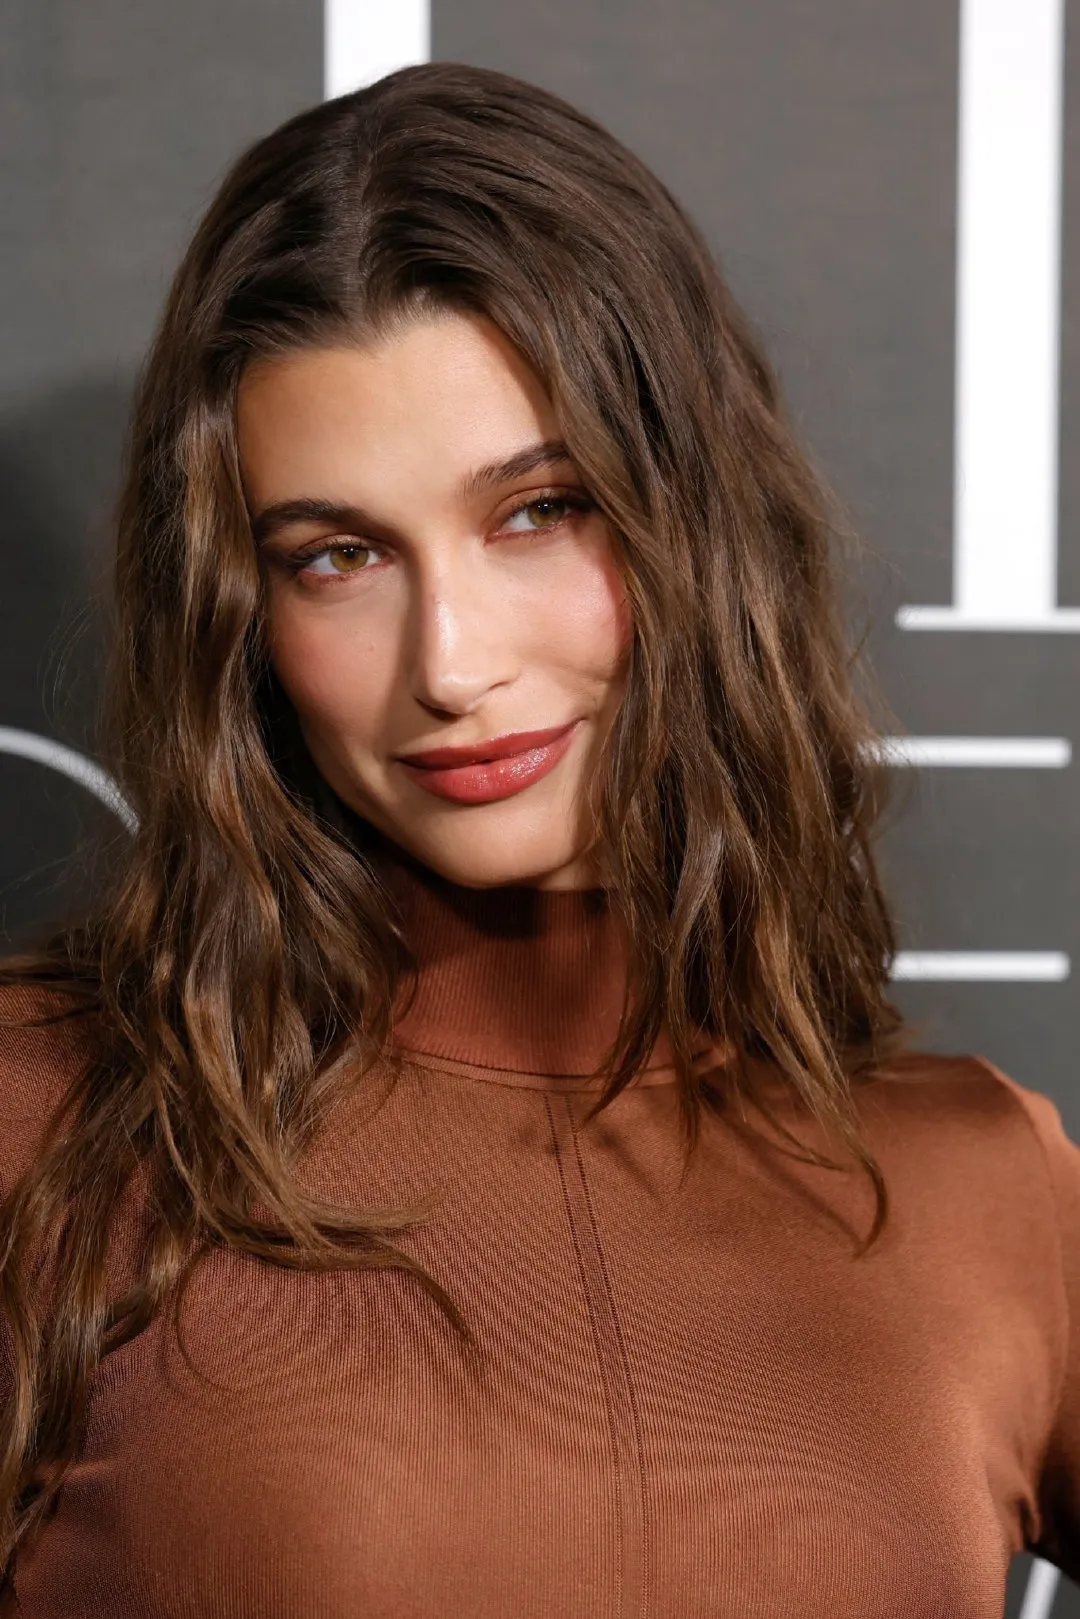 Hailey Bieber attends ELLE's 2022 Women in Hollywood Event | FMV6